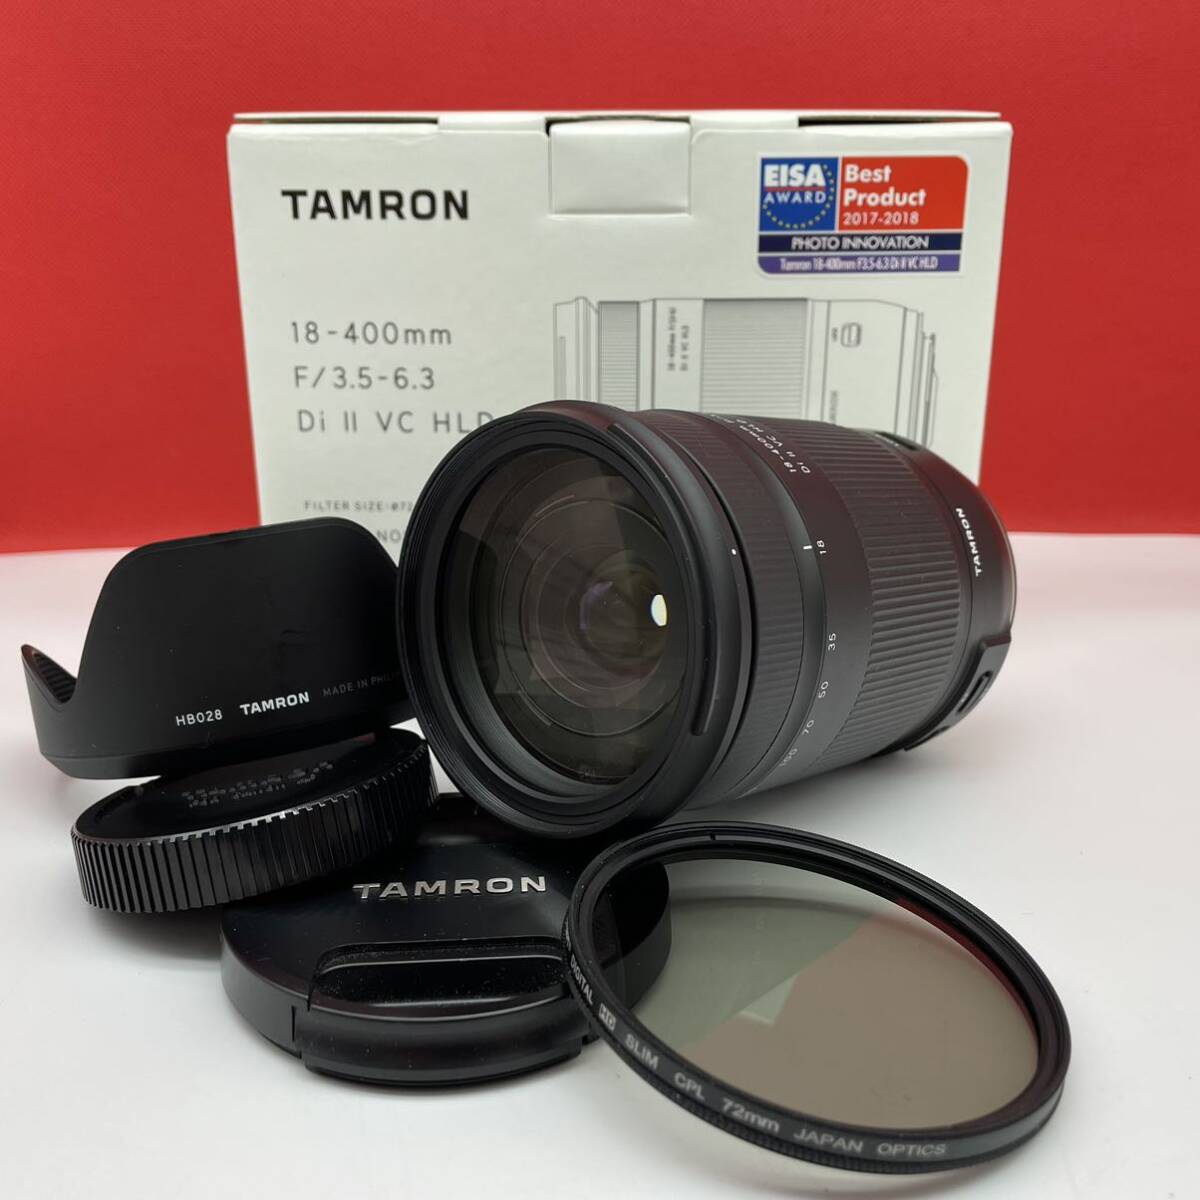 * TAMRON 18-400mm F3.5-6.3 Di II VC HLD camera lens AF operation verification settled Canon for Canon Tamron 